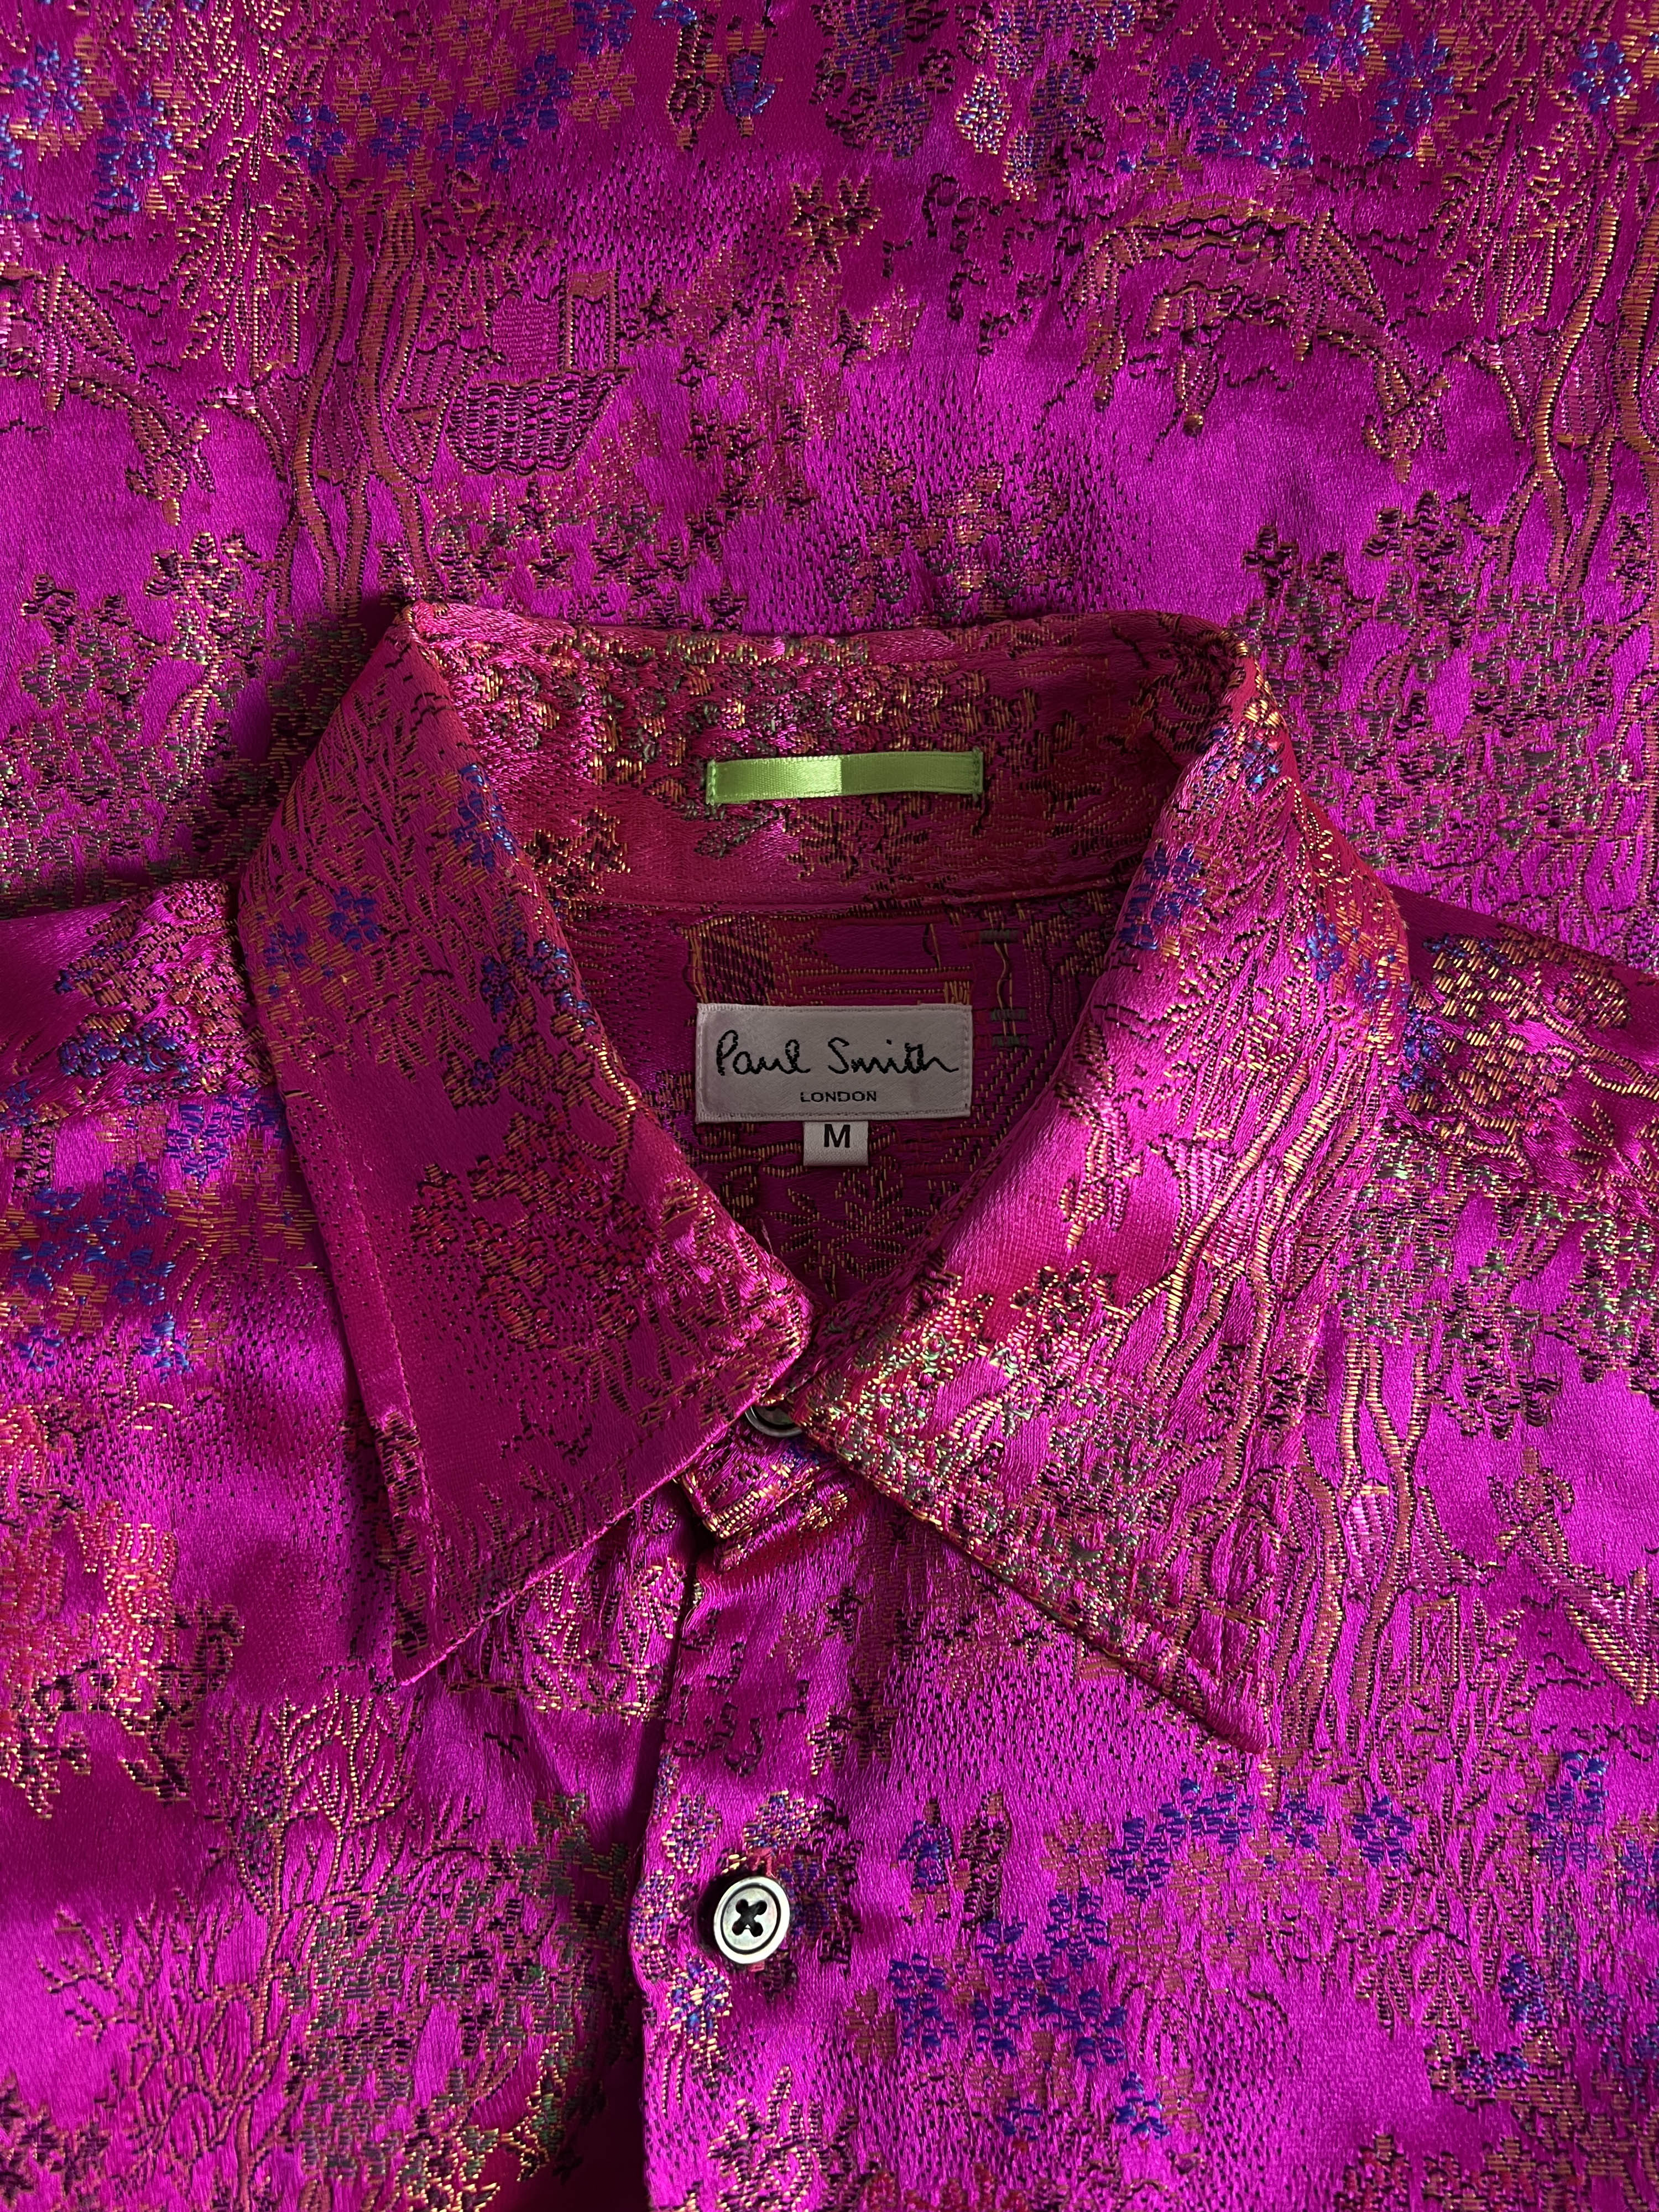 Paul Smith LONDON oriental drawing embroied shirts